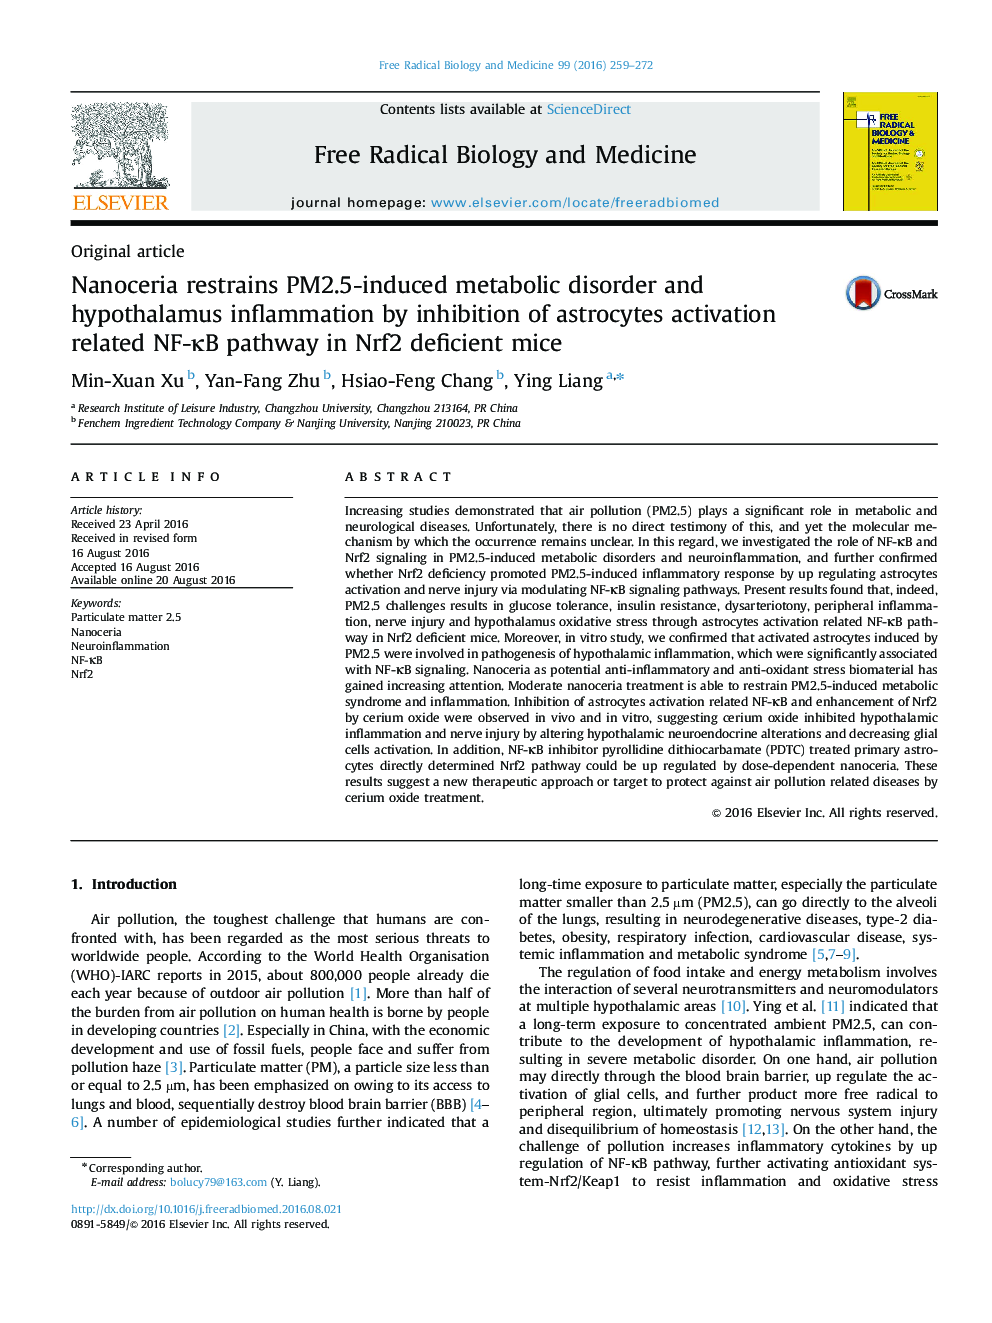 Nanoceria restrains PM2.5-induced metabolic disorder and hypothalamus inflammation by inhibition of astrocytes activation related NF-ÎºB pathway in Nrf2 deficient mice